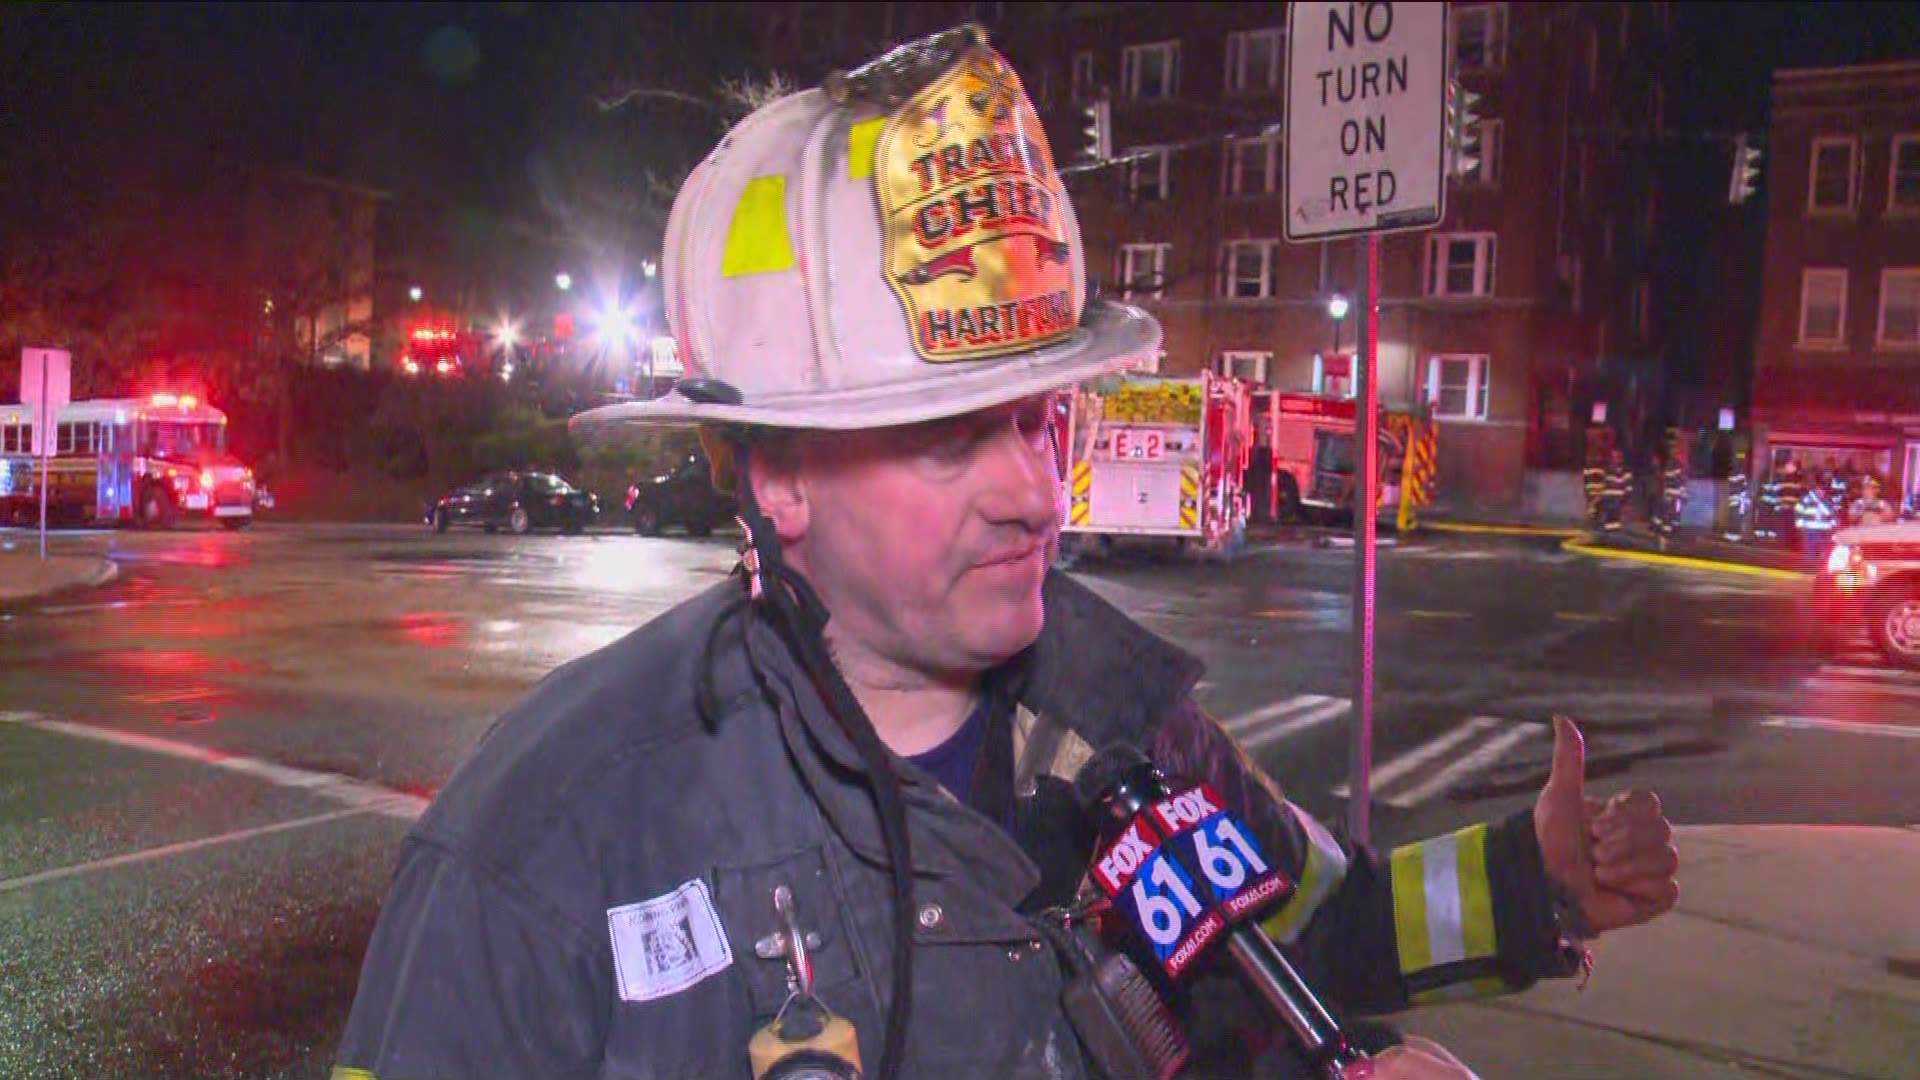 Deputy Fire Chief Jimmie Errickson discusses the 3-alarm fire in Hartford early Sunday morning